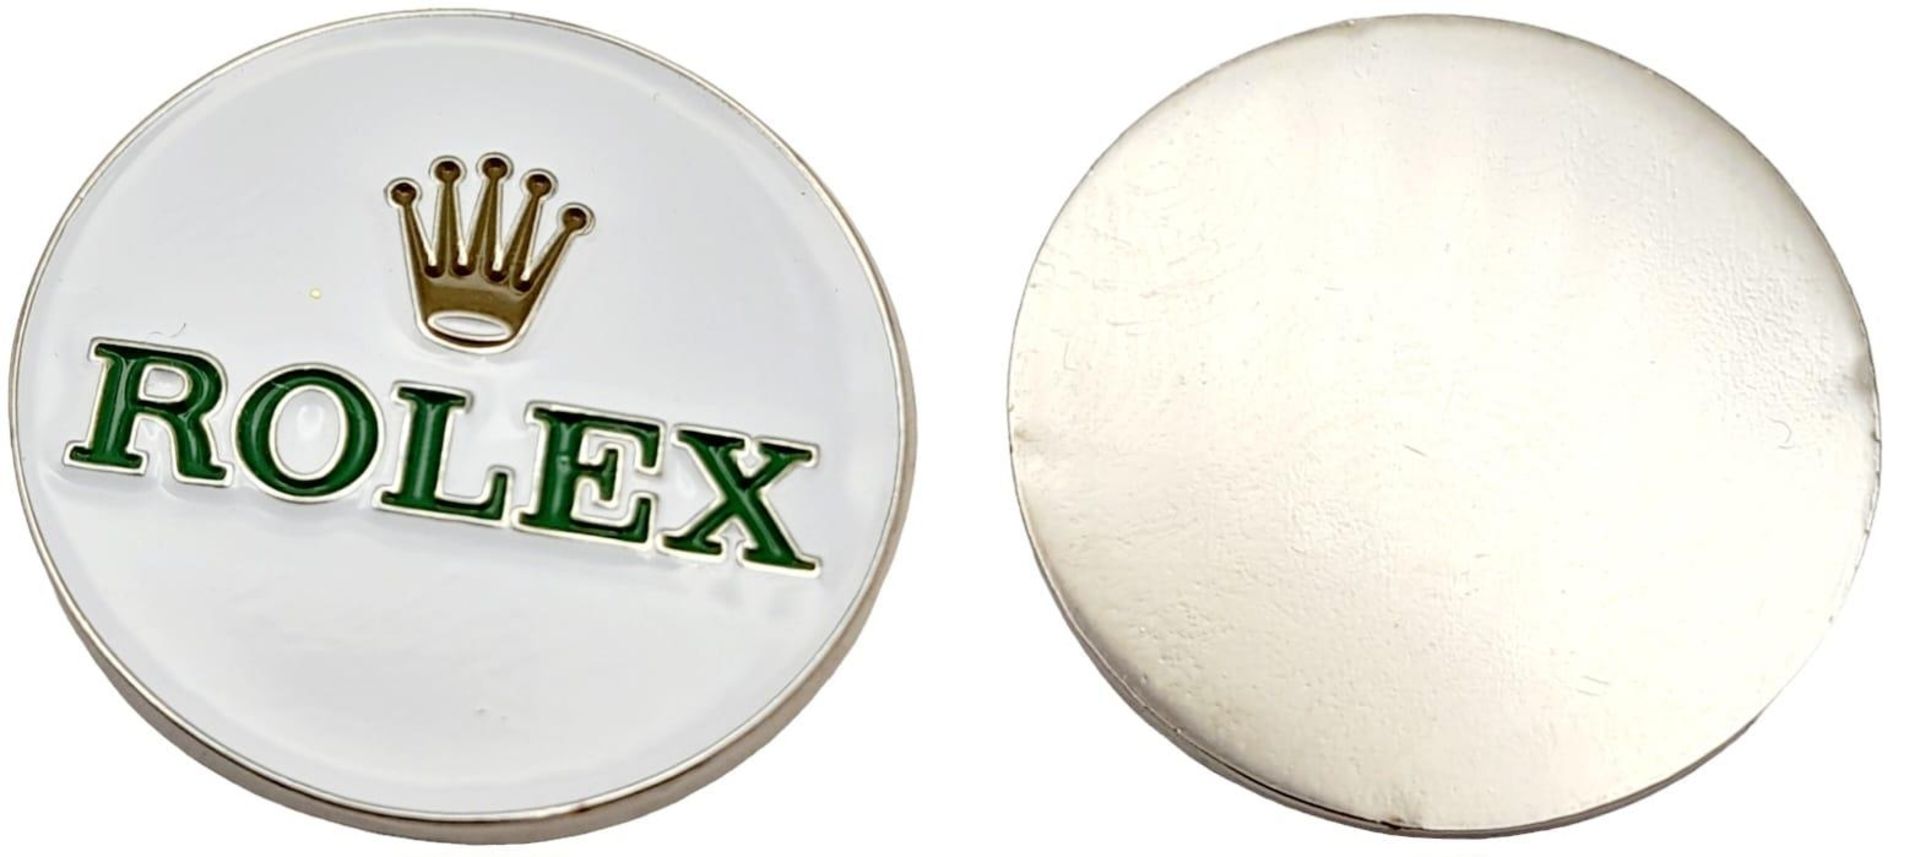 A Rolex Branded Golf Putting Green Divot Repair Tool with Removable Rolex Branded Ball Markers. - Bild 4 aus 5